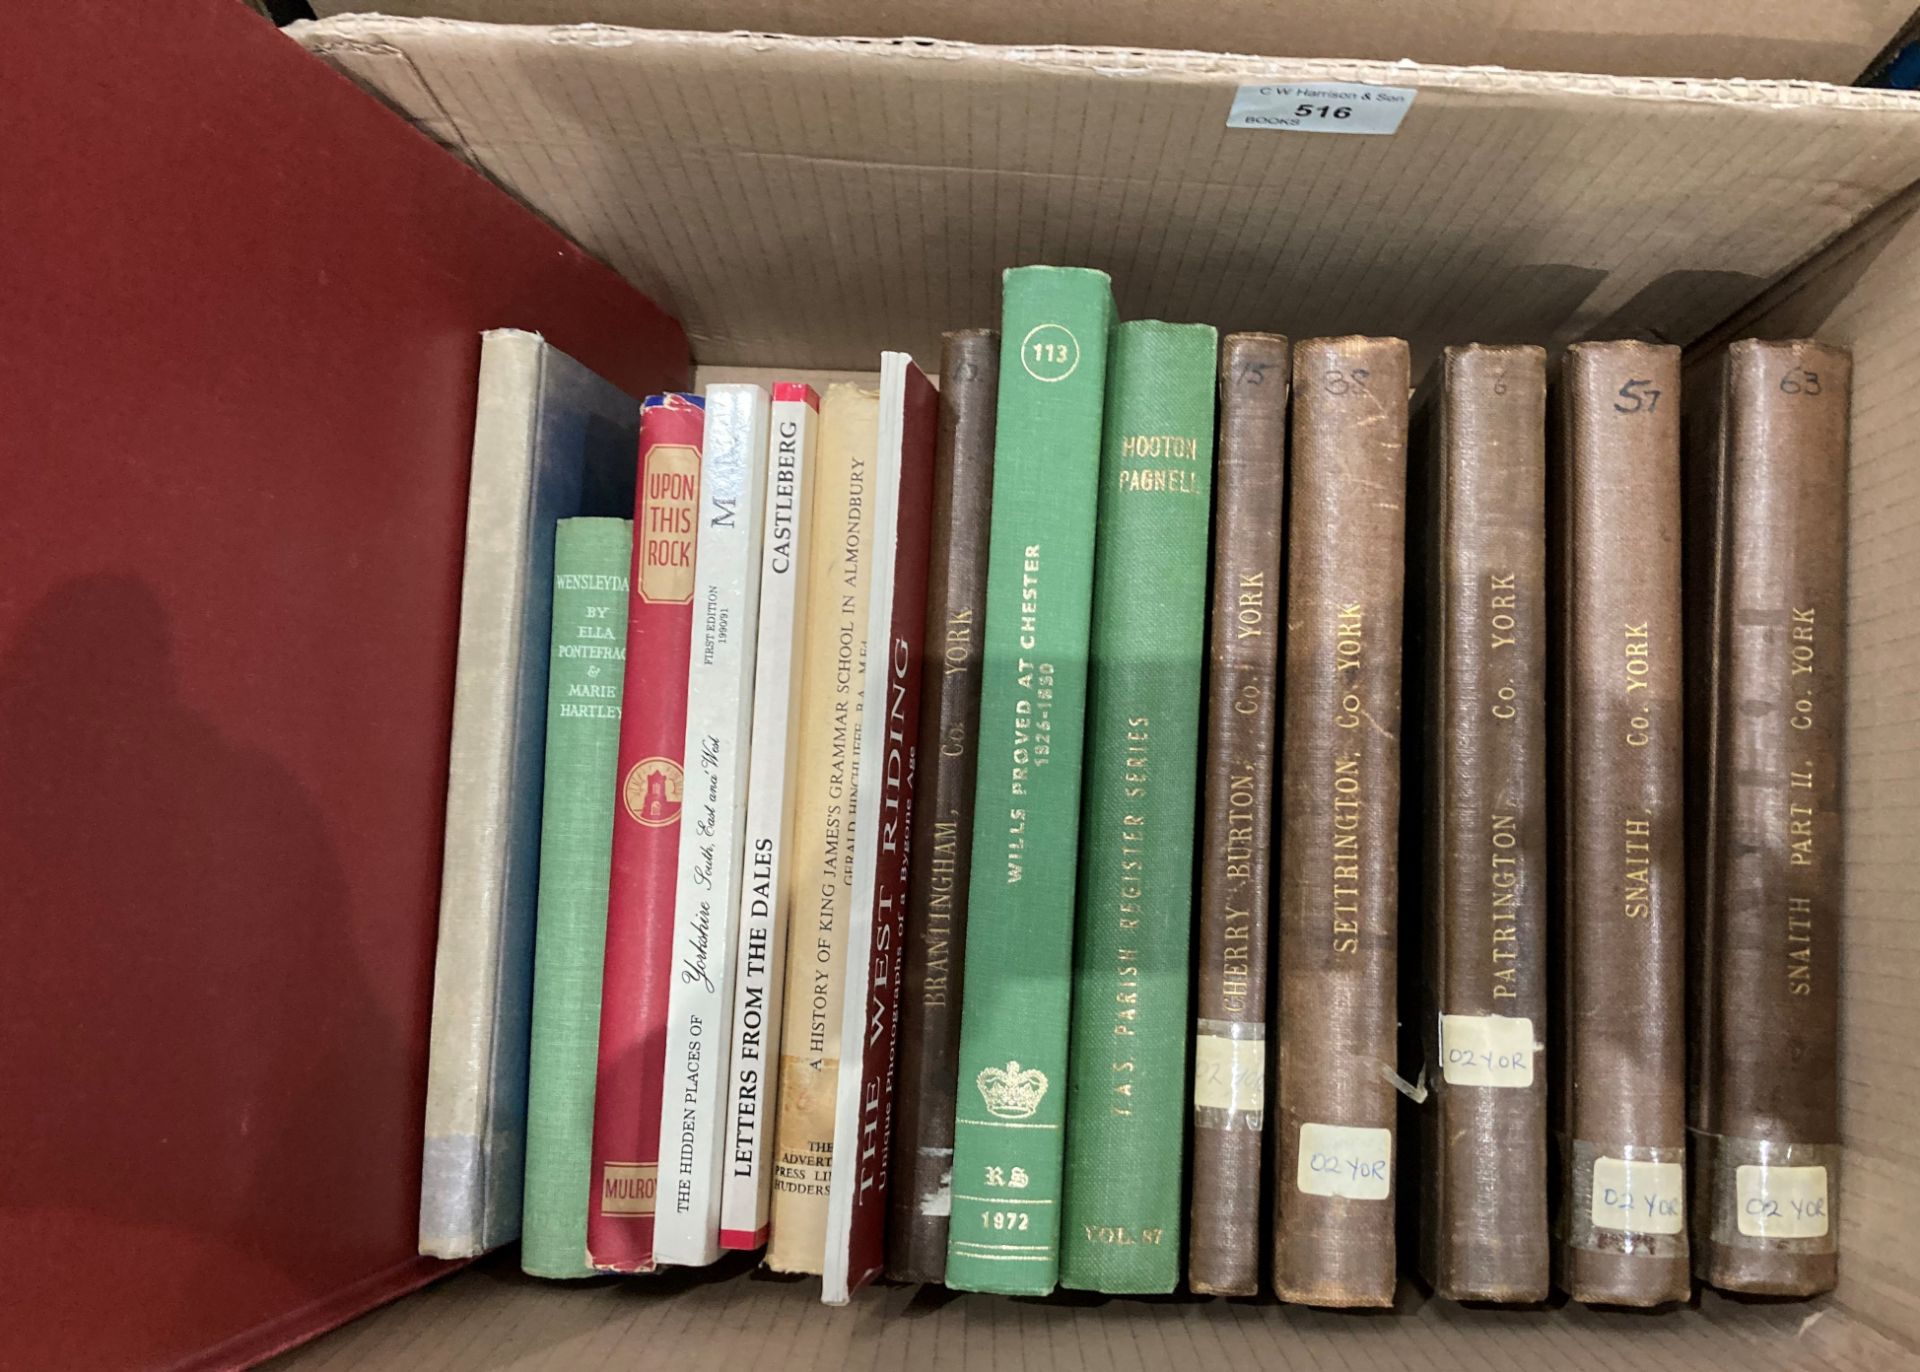 Contents to box - sixteen books relating to Yorkshire and Yorkshire life including Domesday Book